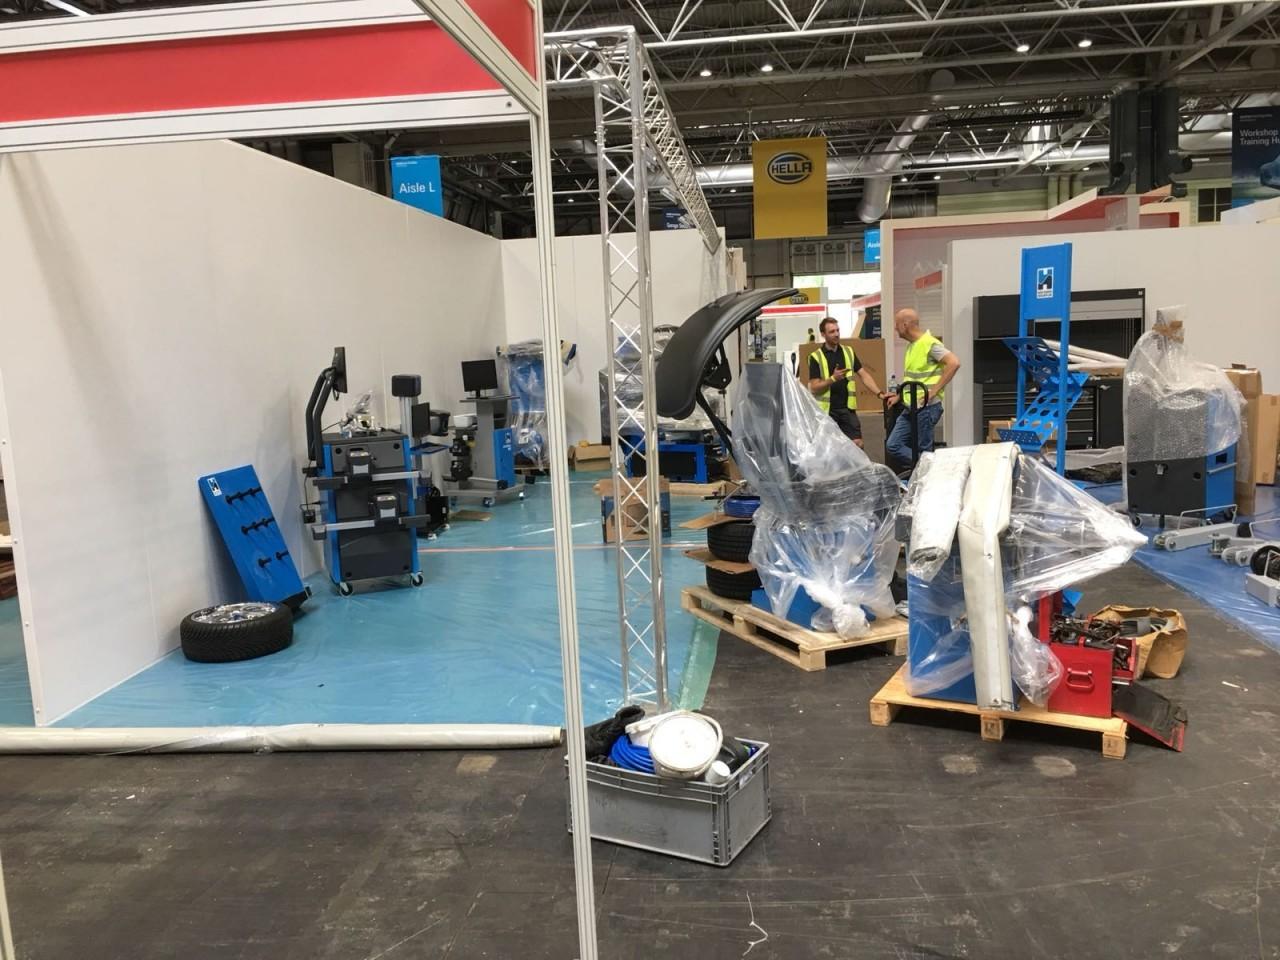 Getting all Tyre Fitting Equipment ready for Automechanika 2018